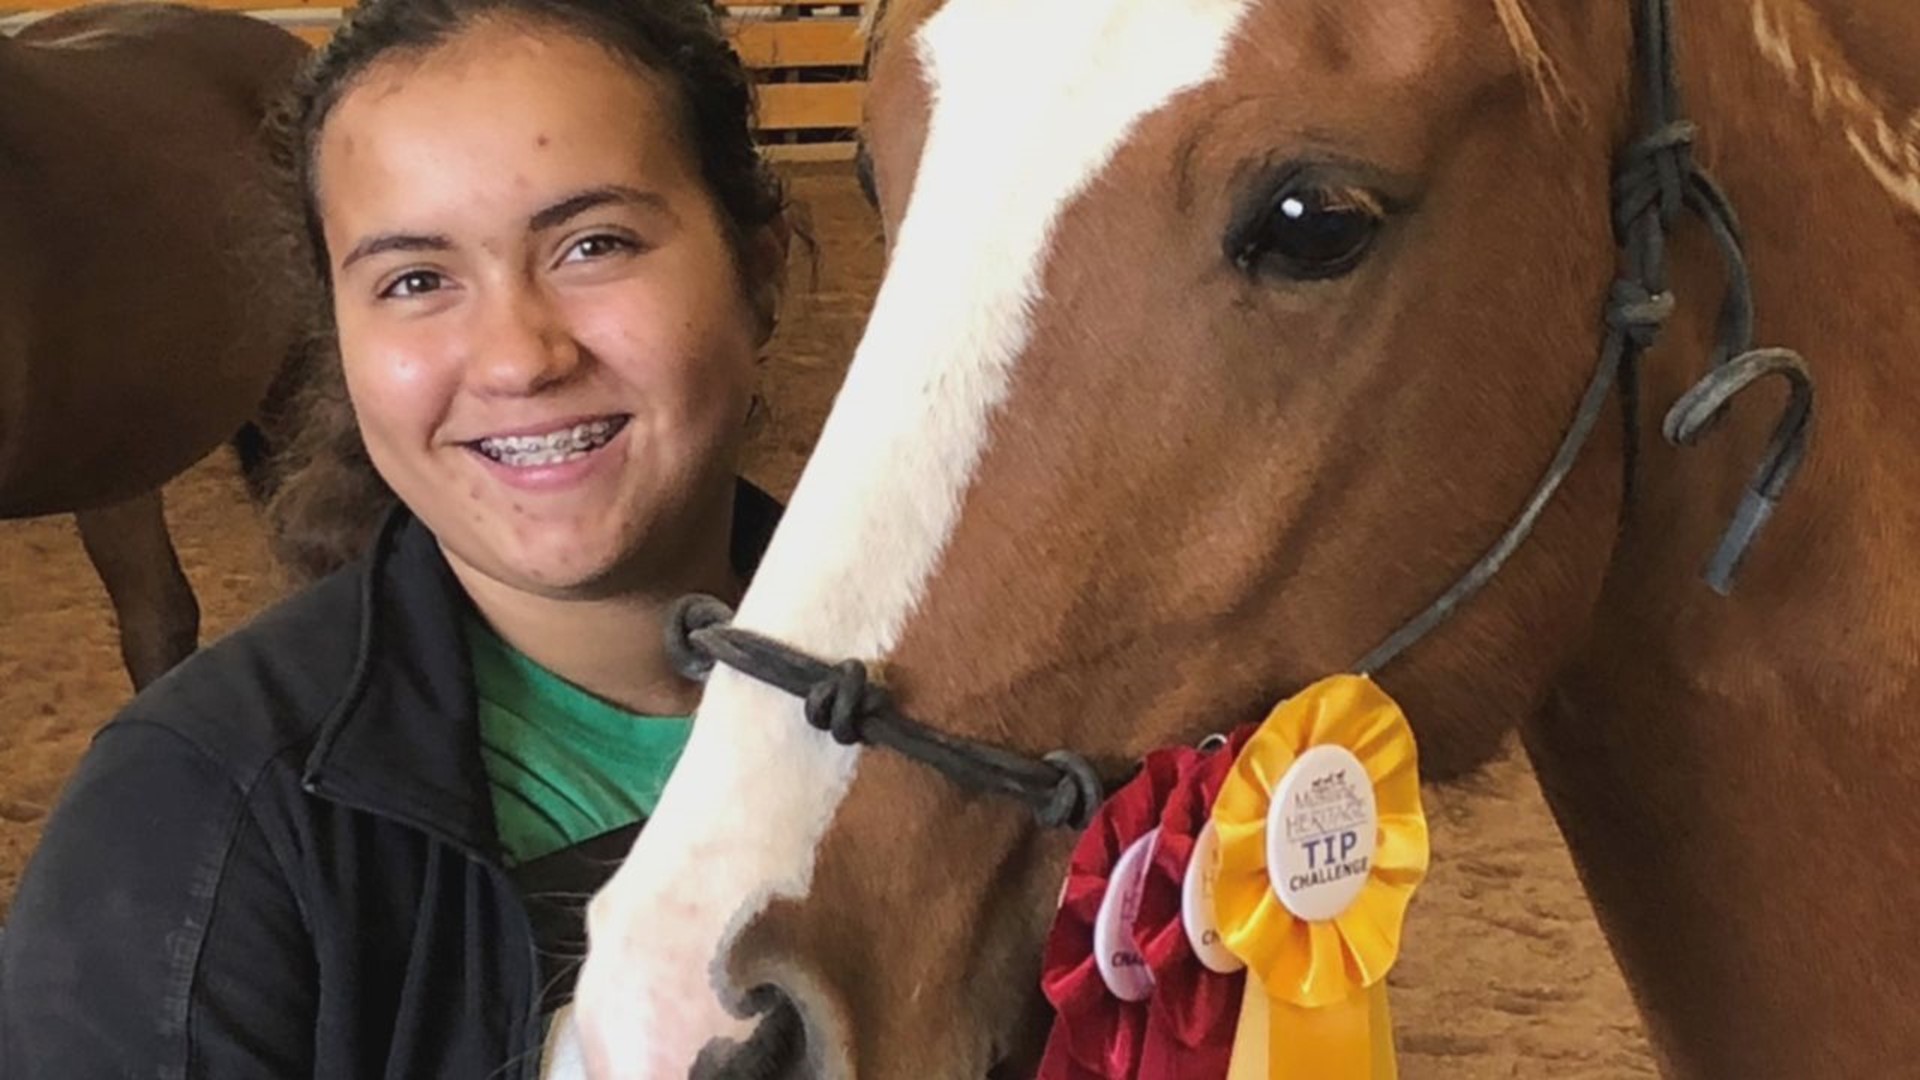 17-Year-Old from Nescopeck Competed with Mustang Kian Despite Broken Arm